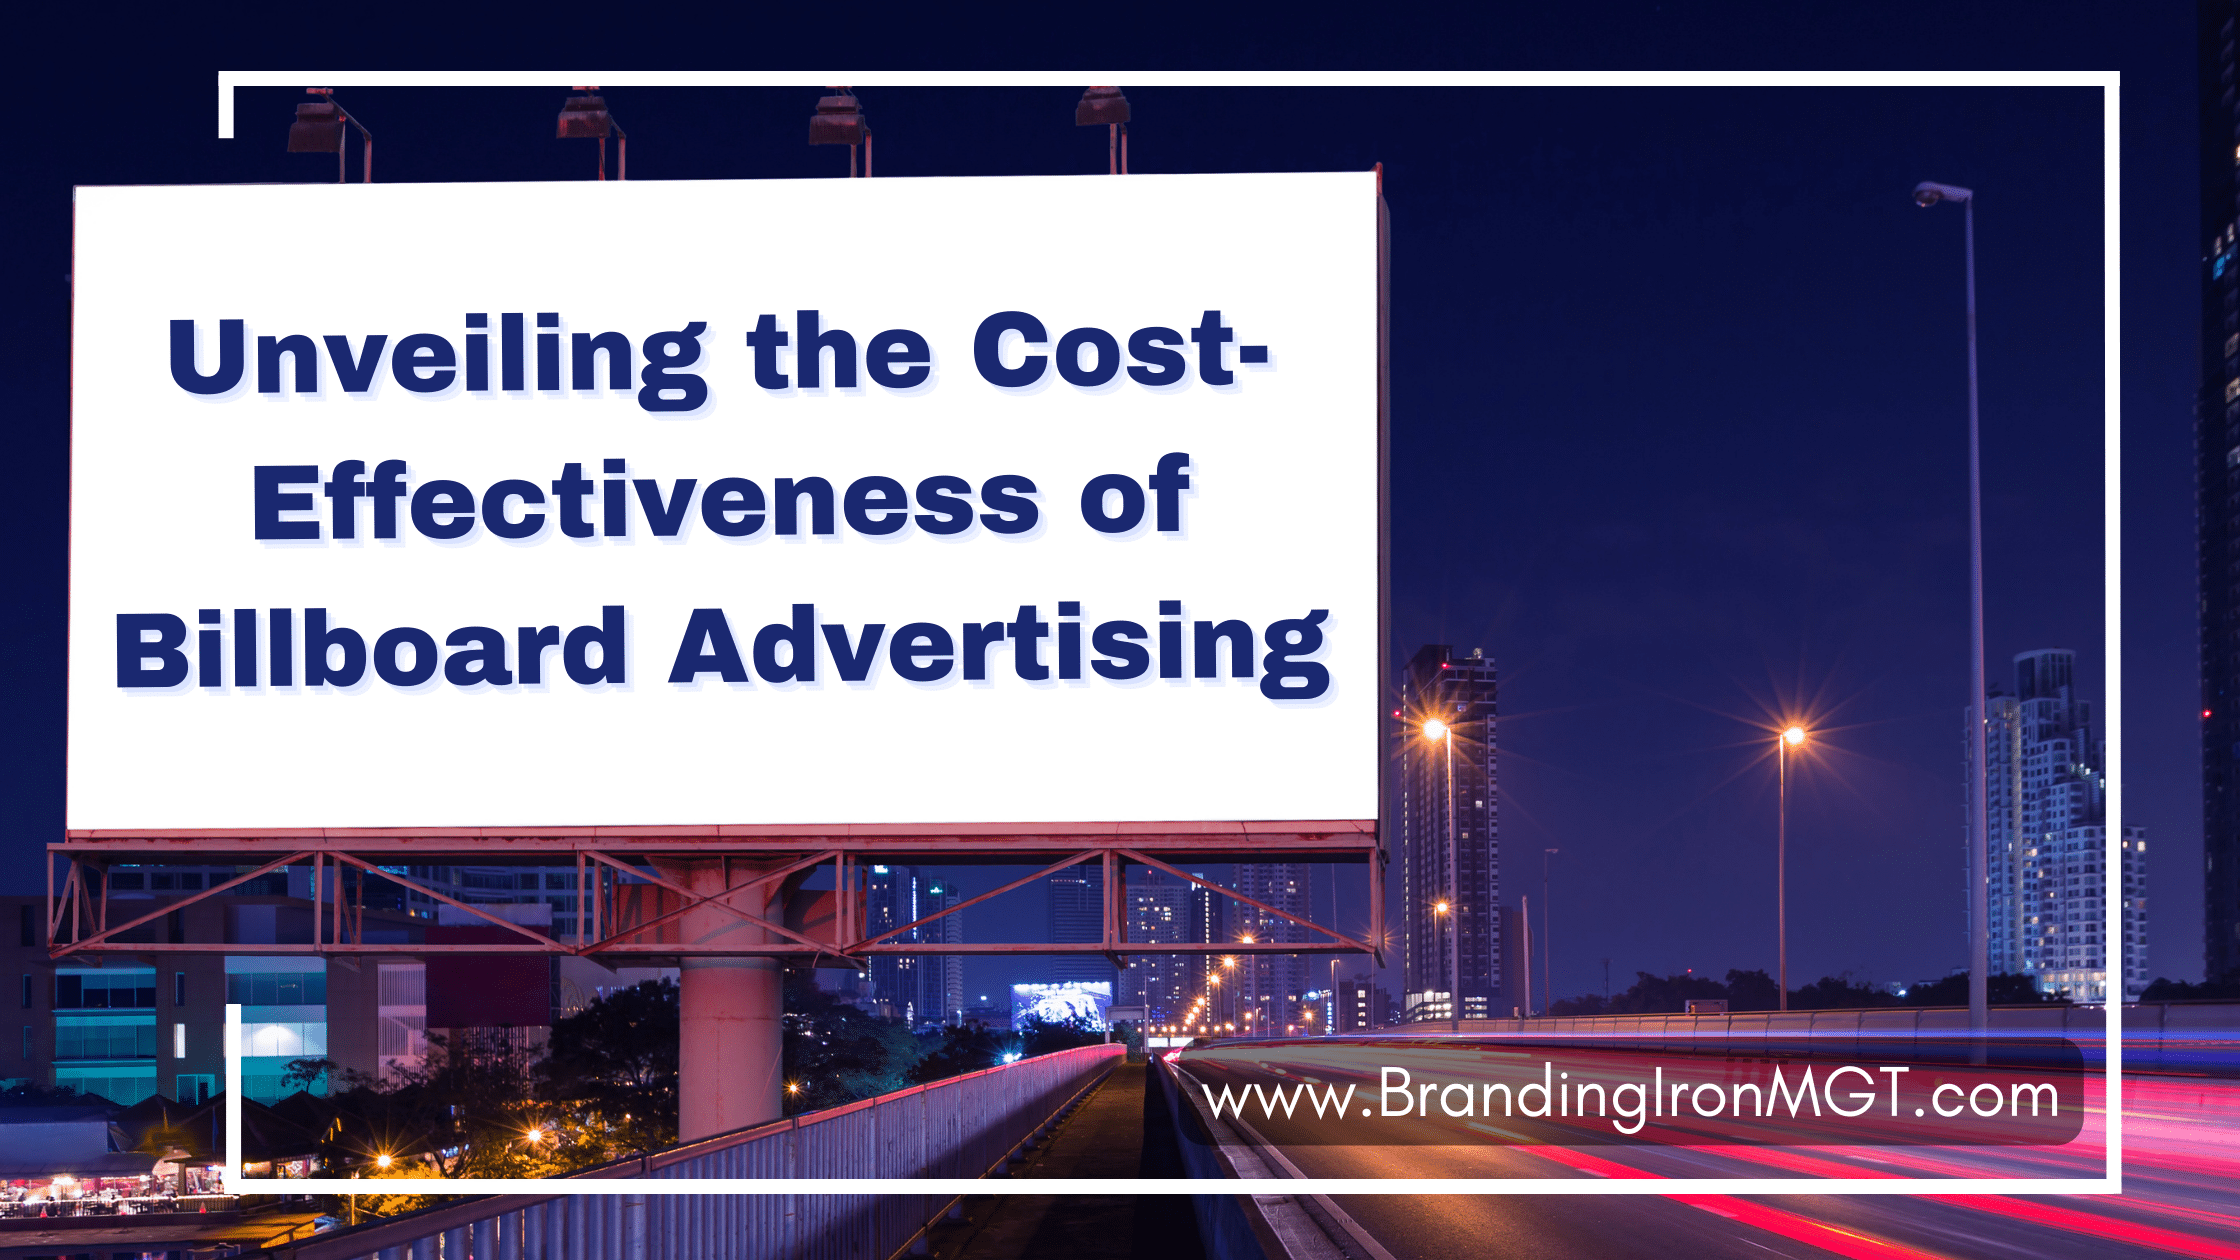 Unveiling the Cost-Effectiveness of Billboard Advertising